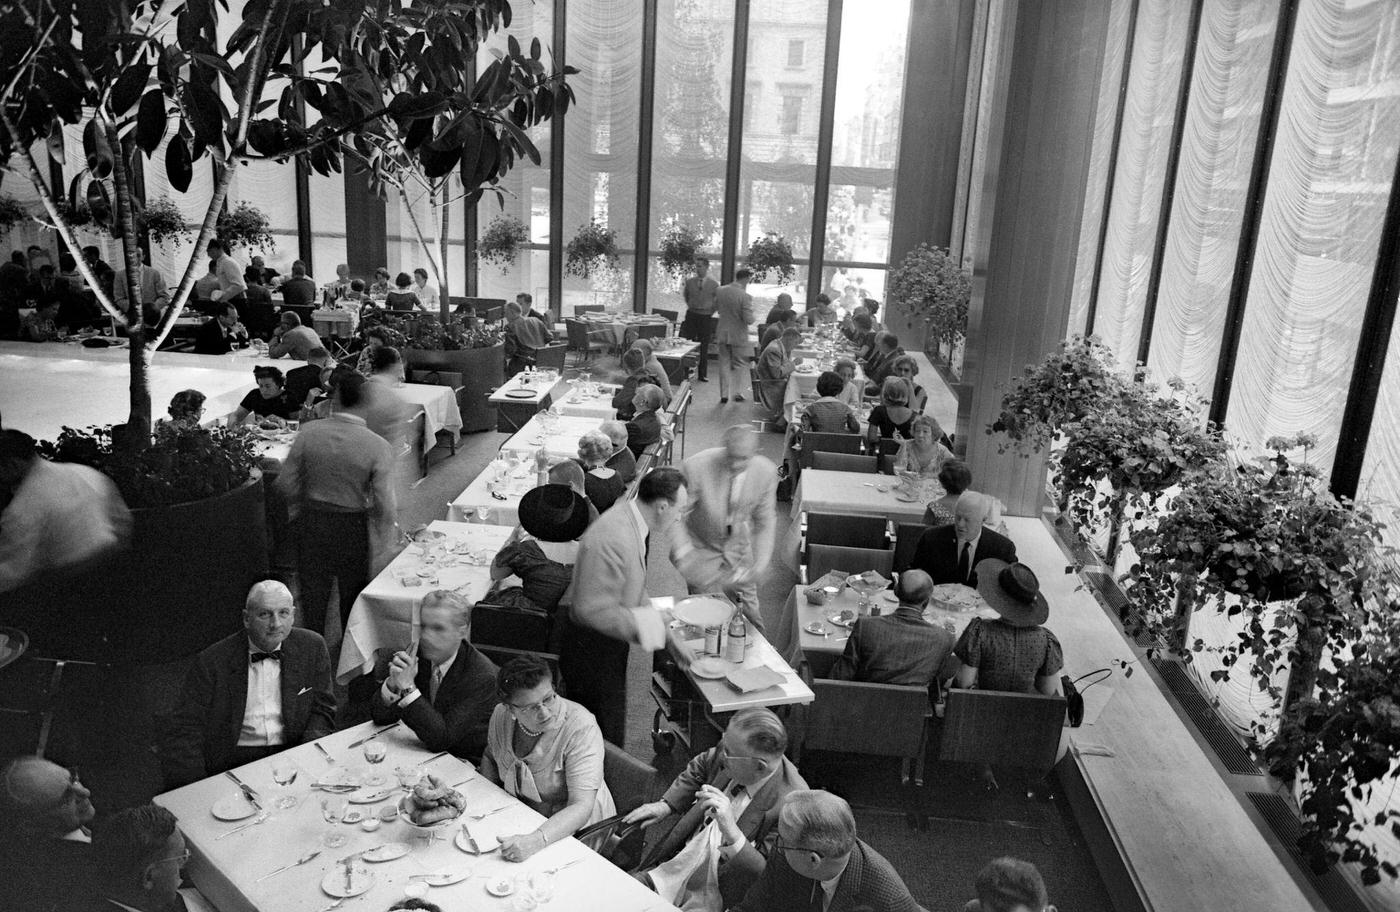 Tourists And Diners At The Four Seasons, Located In Seagrams Skyscraper On Park Avenue, Manhattan, 1959